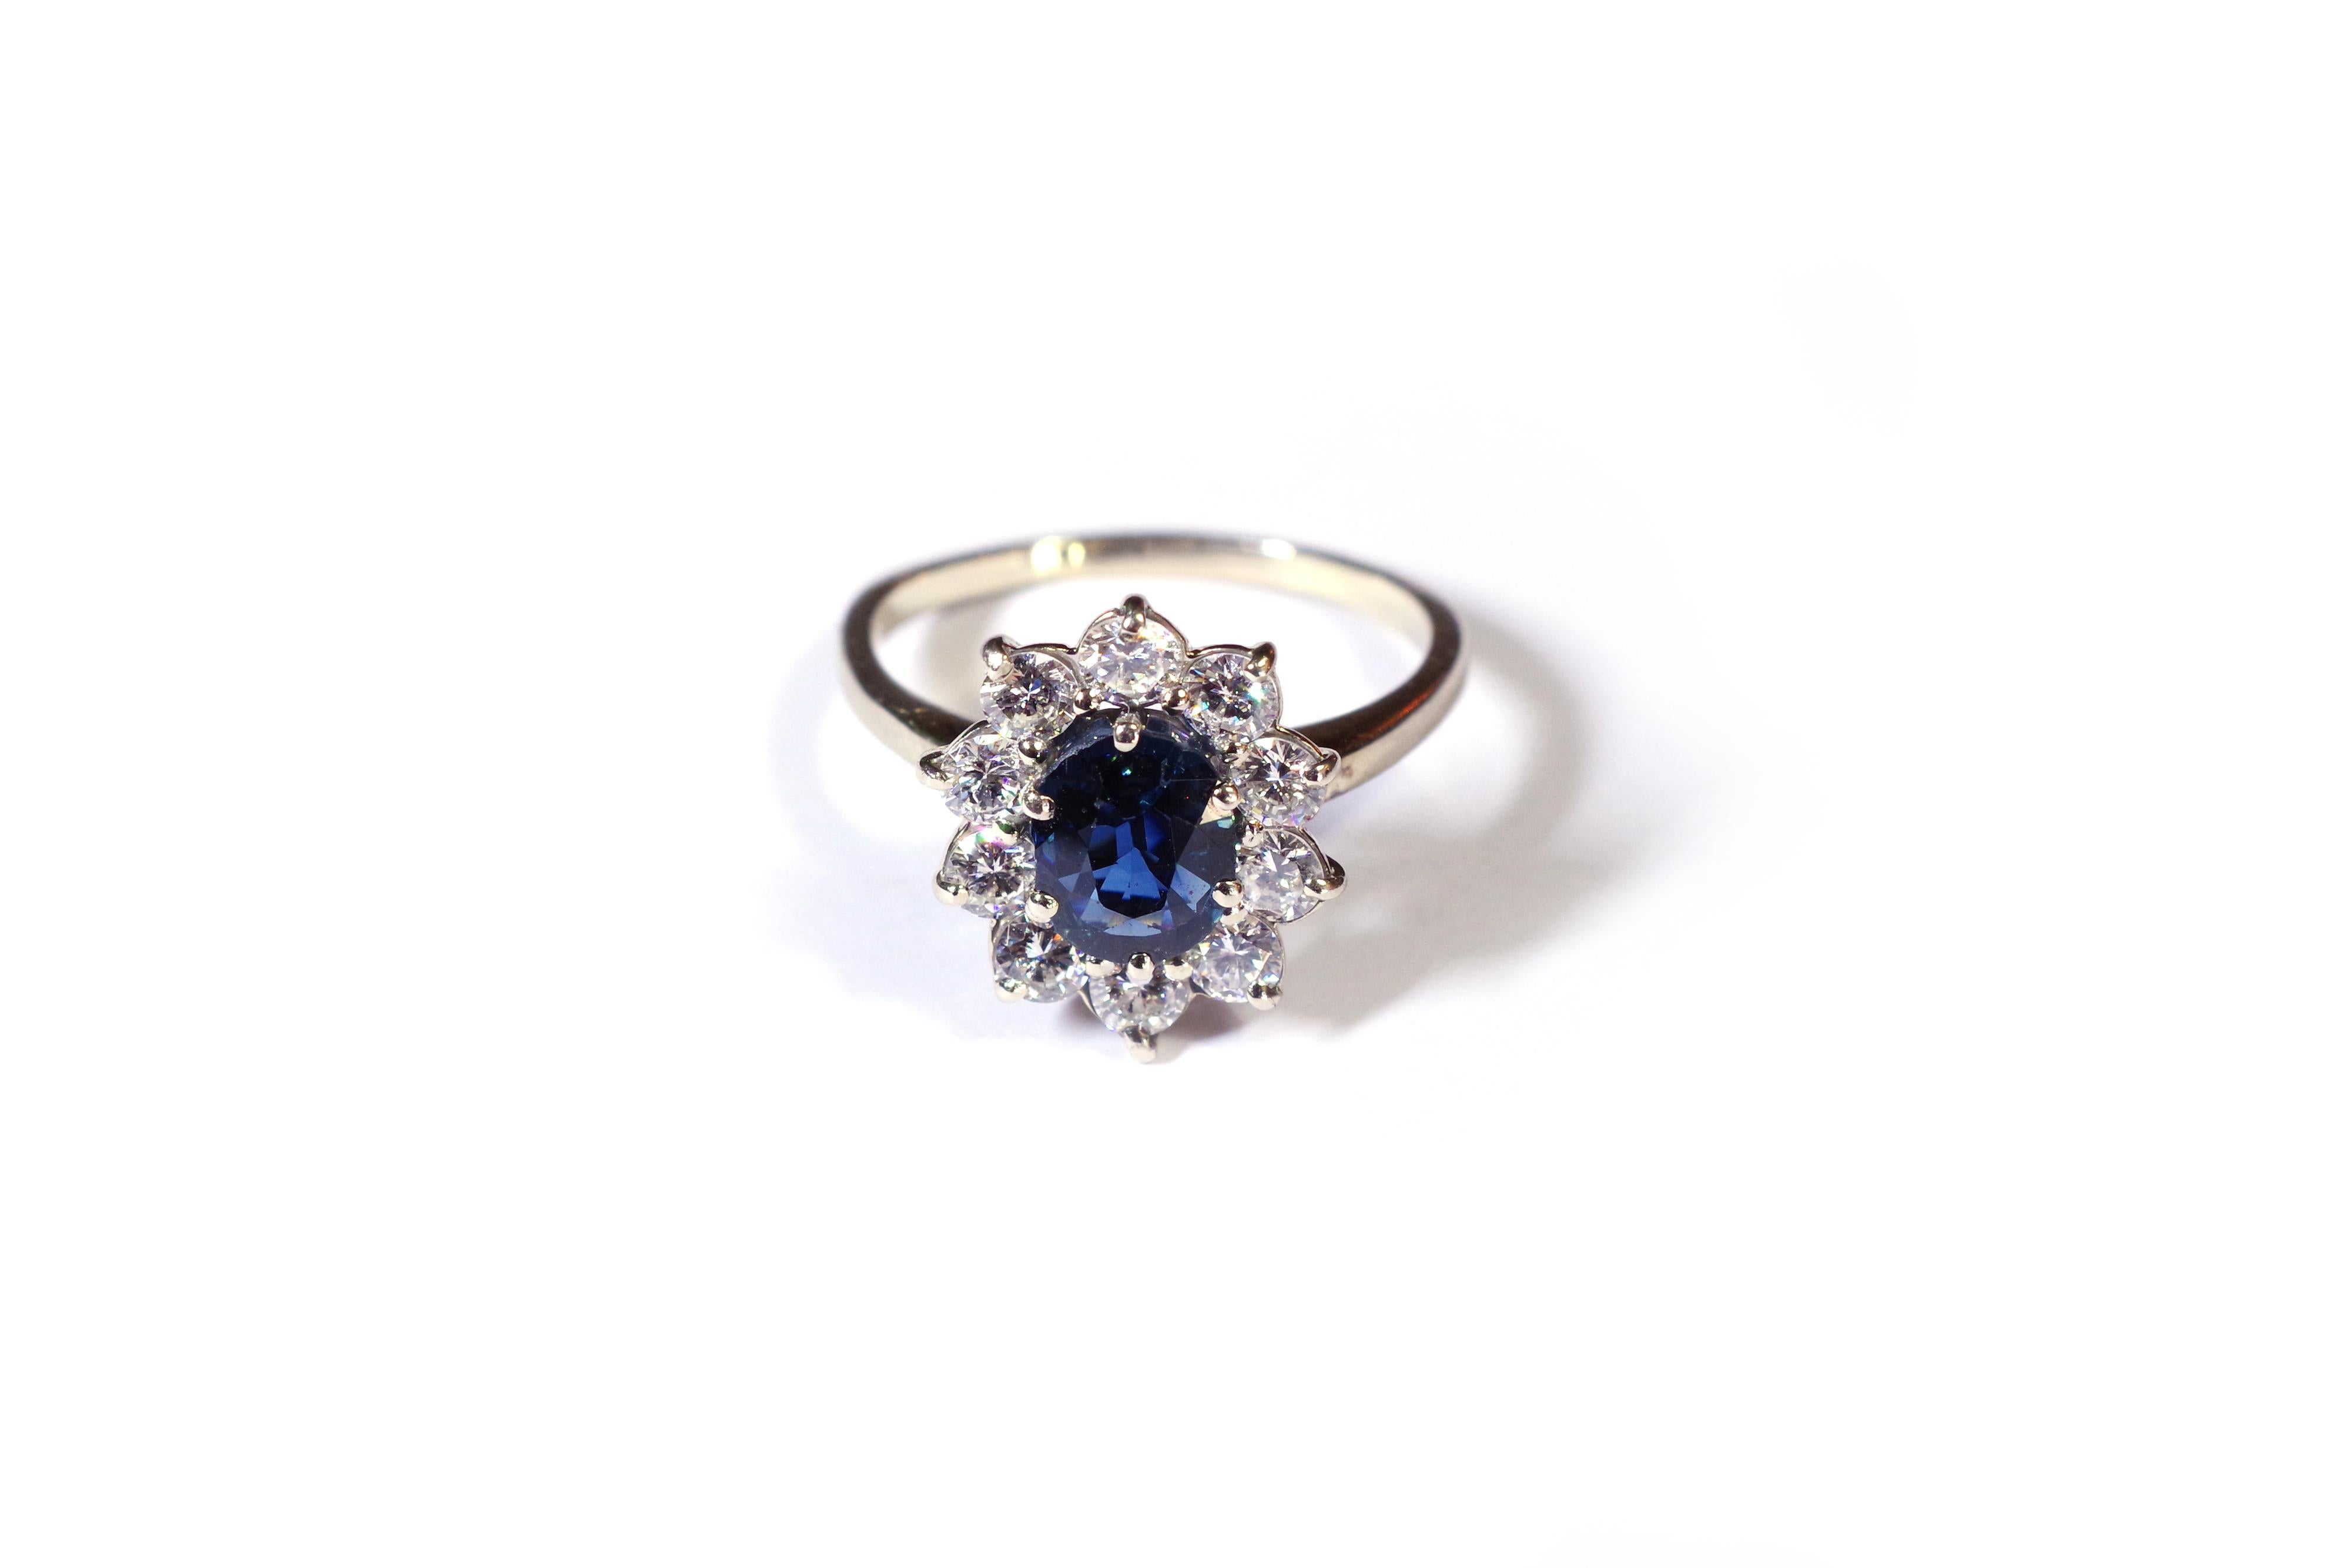 Sapphire diamond cluster ring in white gold 18 karats. The bezel is set with an oval cut sapphire surrounded by 10 brilliant-cut diamonds. The sapphire is set with six claws and has a beautiful deep blue colour. Second hand engagement ring, circa